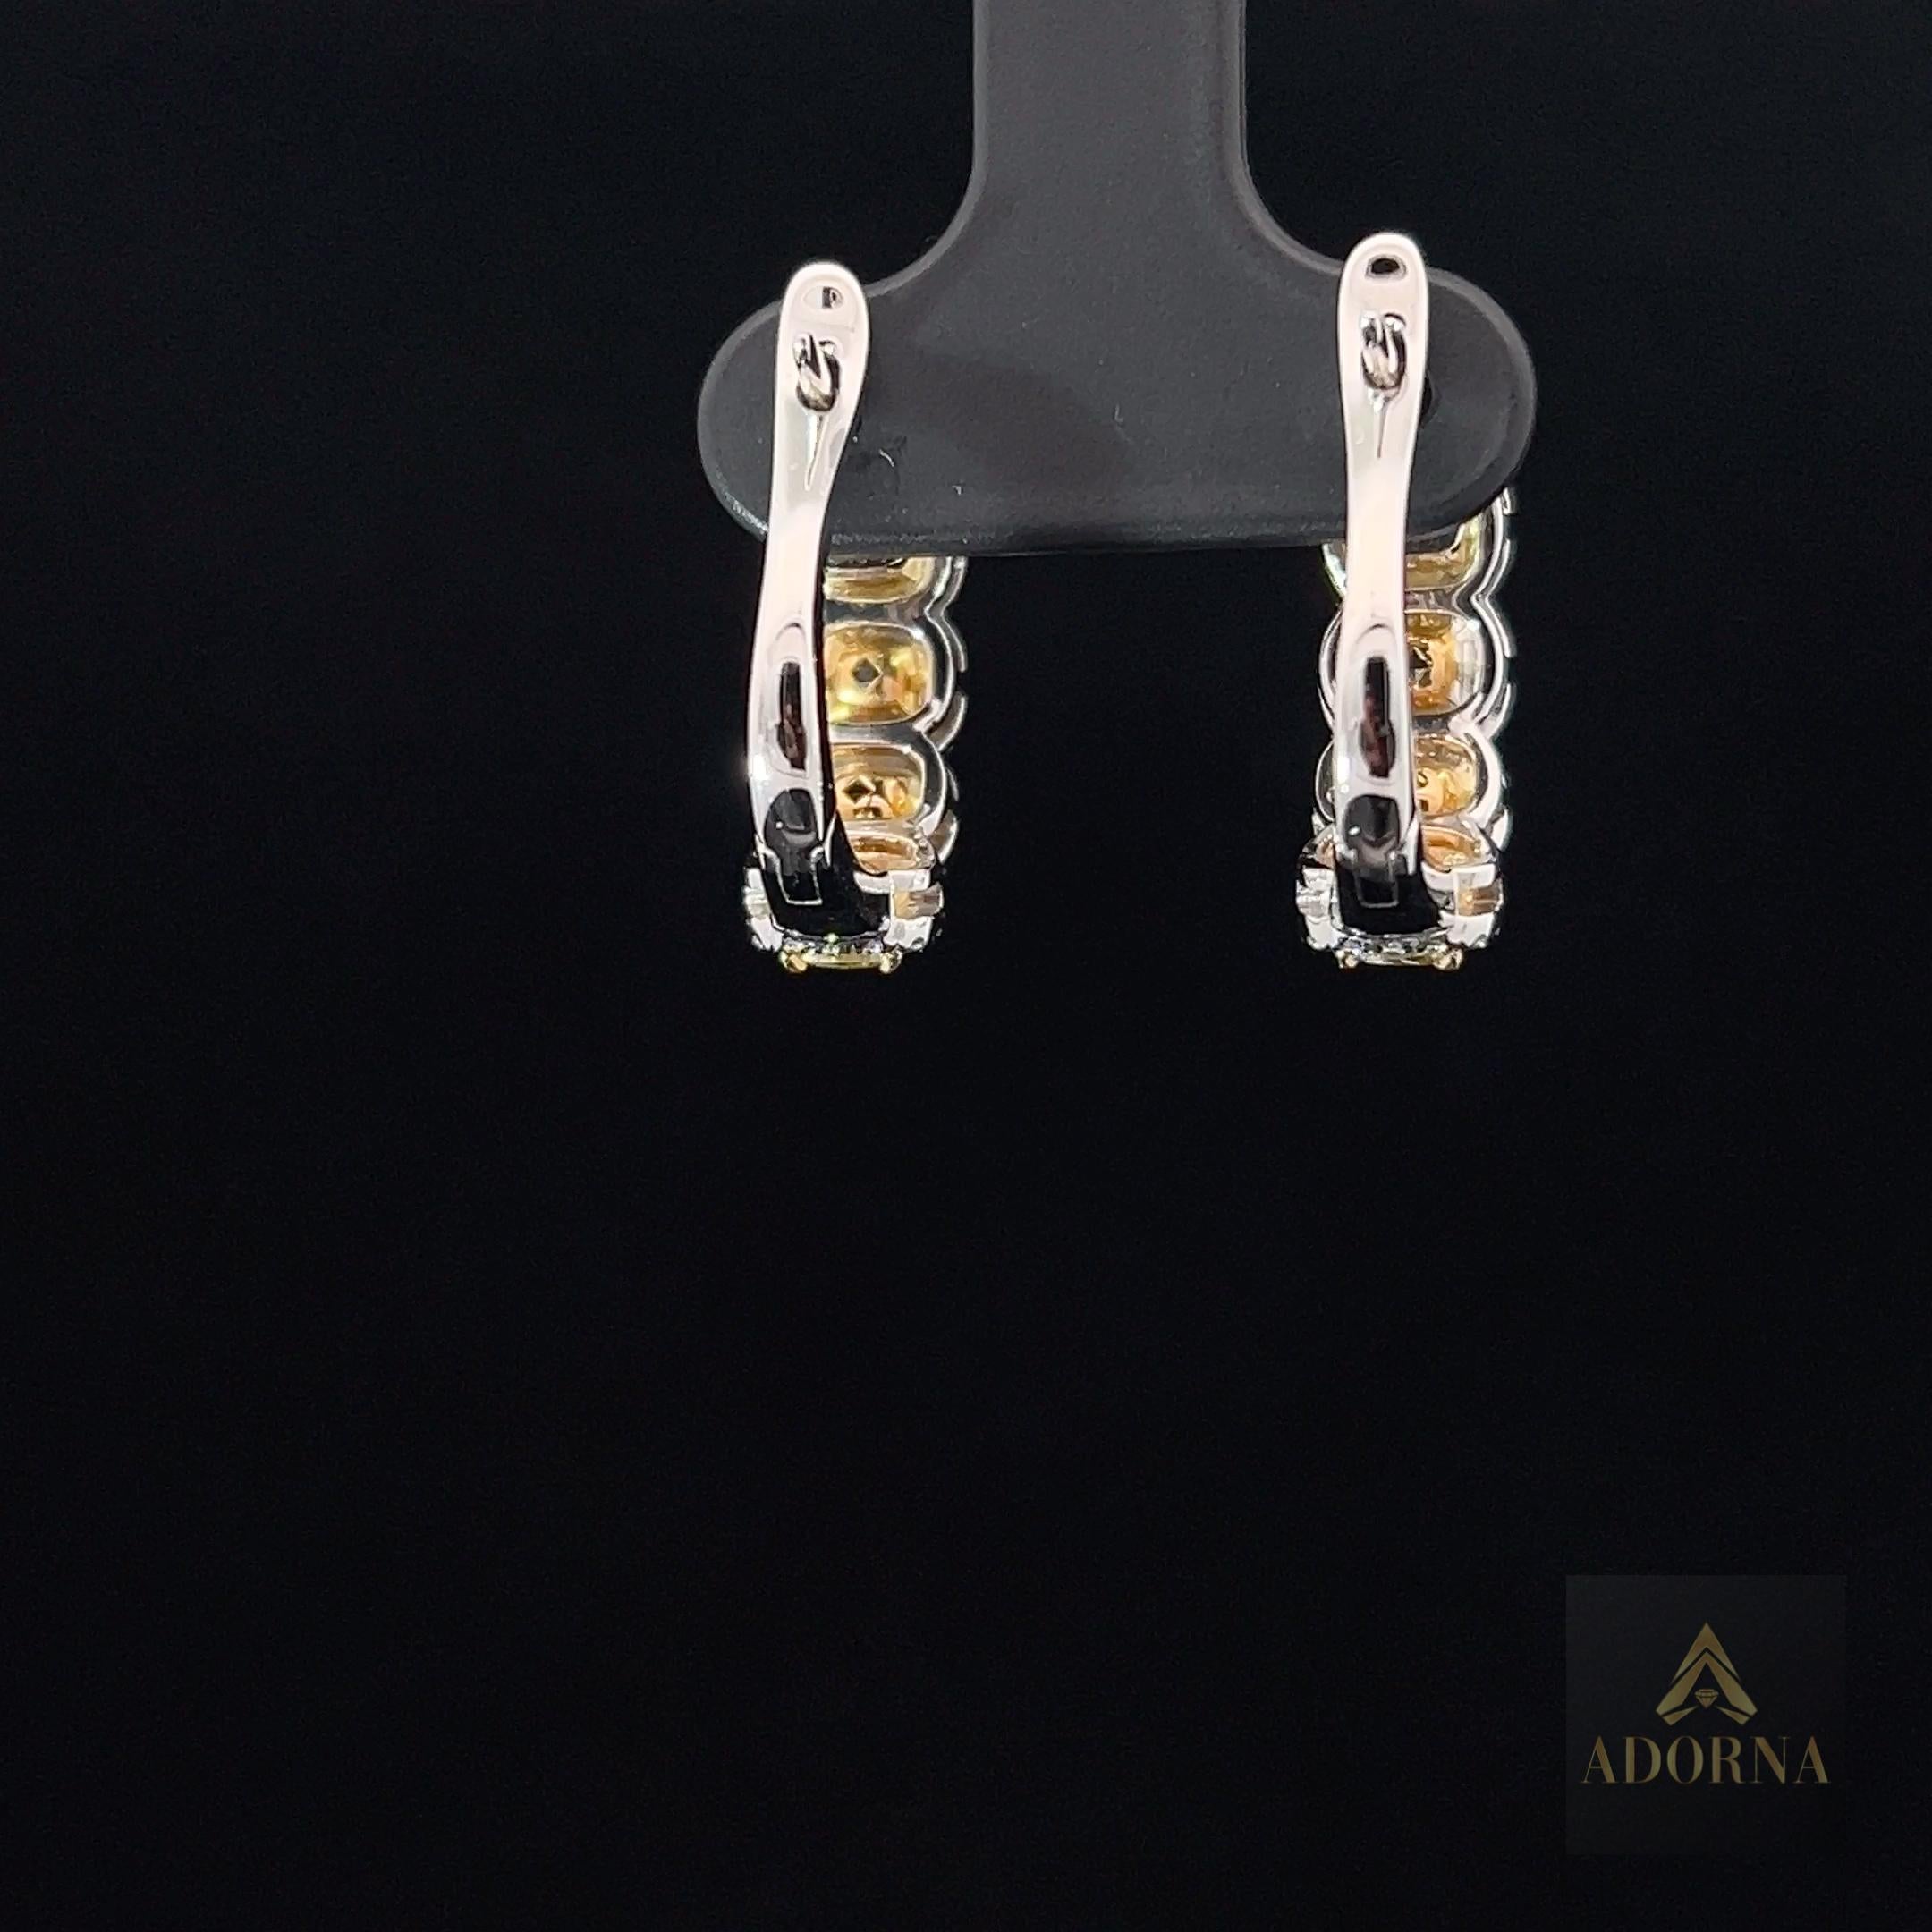 Earring Information
Diamond Type : Natural Diamond
Metal : 18K
Metal Color : Yellow Gold, White Gold
Diamond Carat Weight : 2.50ttcw
Lead Time : 4-8 Weeks (If out of Stock)


JEWELRY CARE
Over the course of time, body oil and skin products can